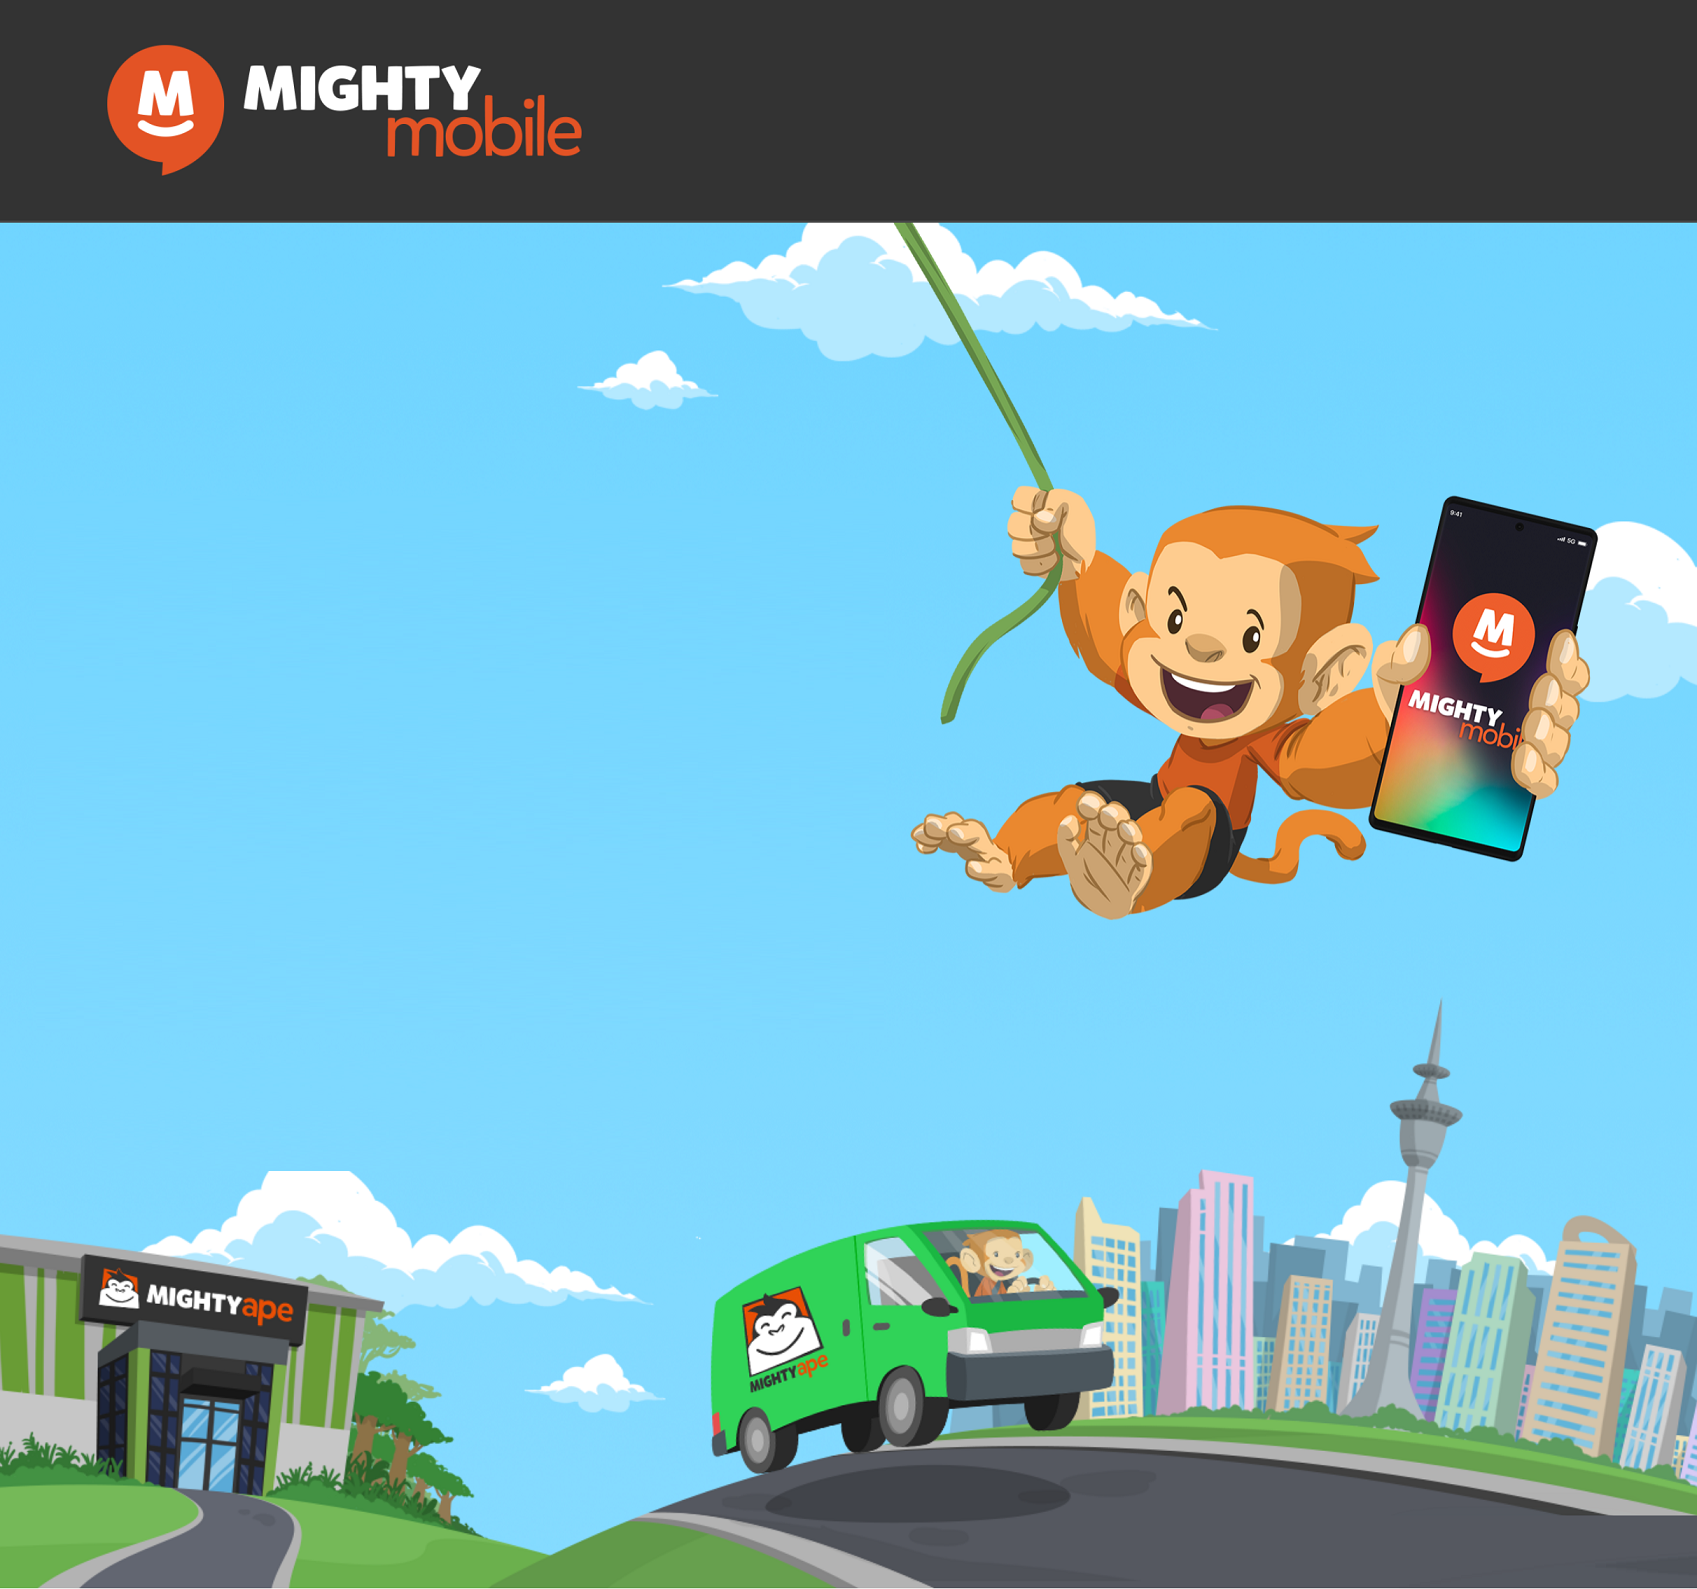 Mighty Ape Mobile Plans launch as Mighty Mobile 